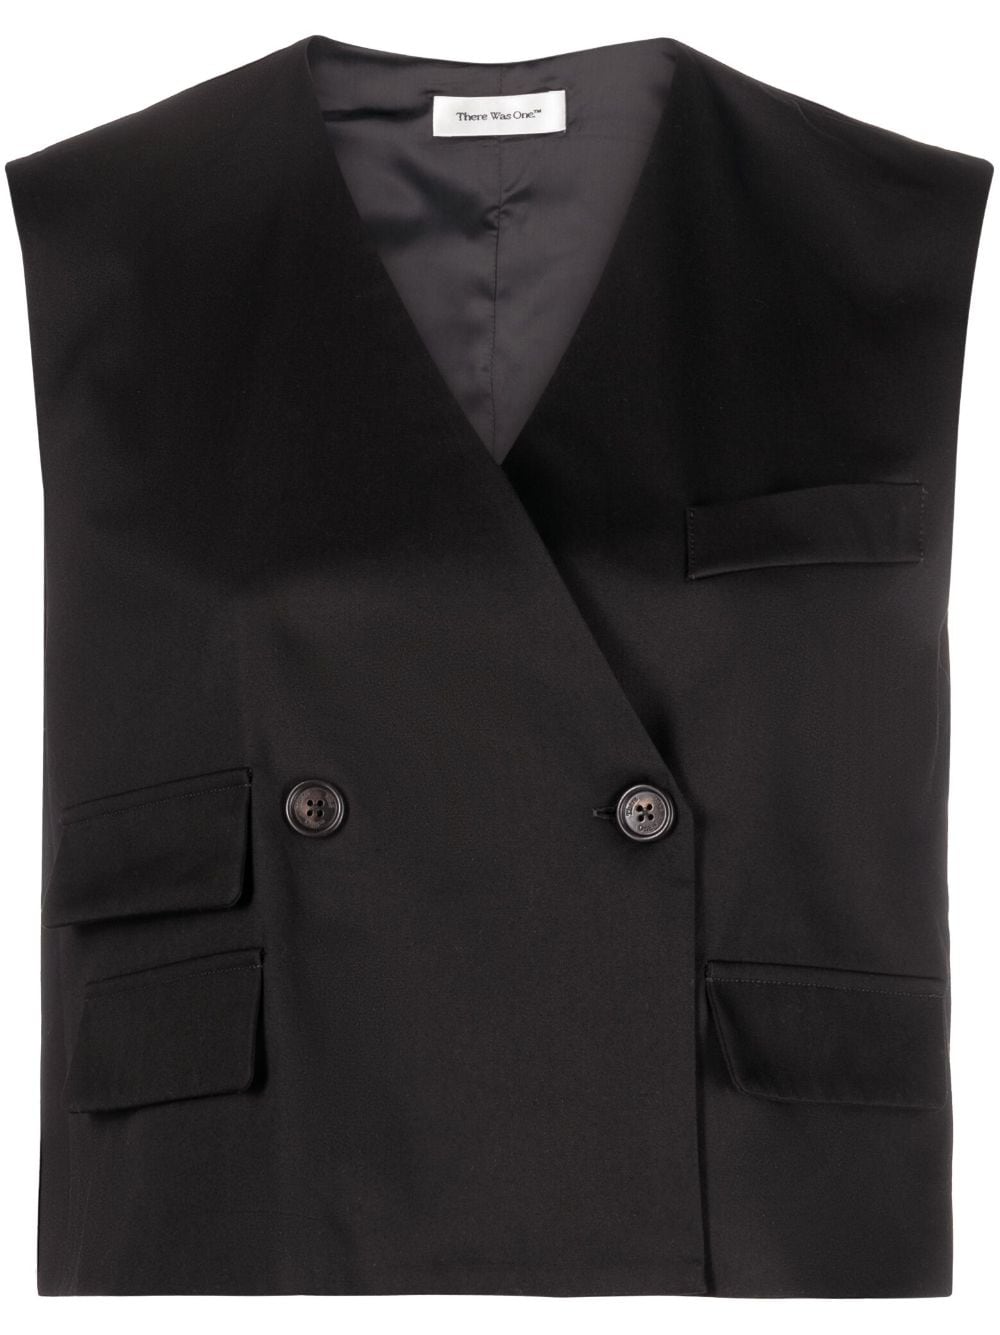 There Was One double-breasted cotton waistcoat - Black von There Was One